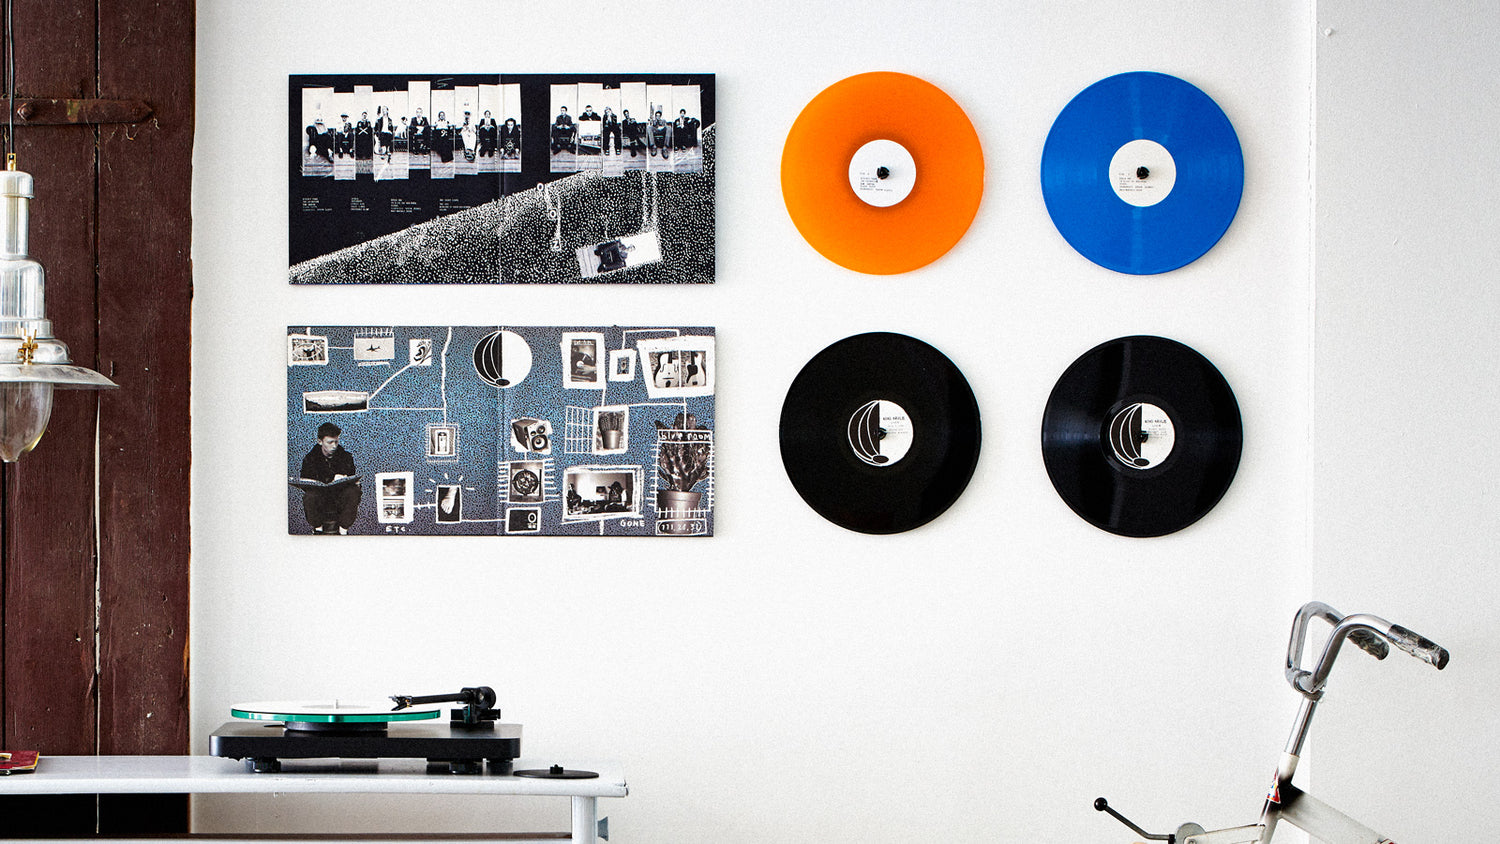 A record gallery consisting of both album covers and vinyl records, by combining the Twelve Inch Adapter and Twelve Inch Original